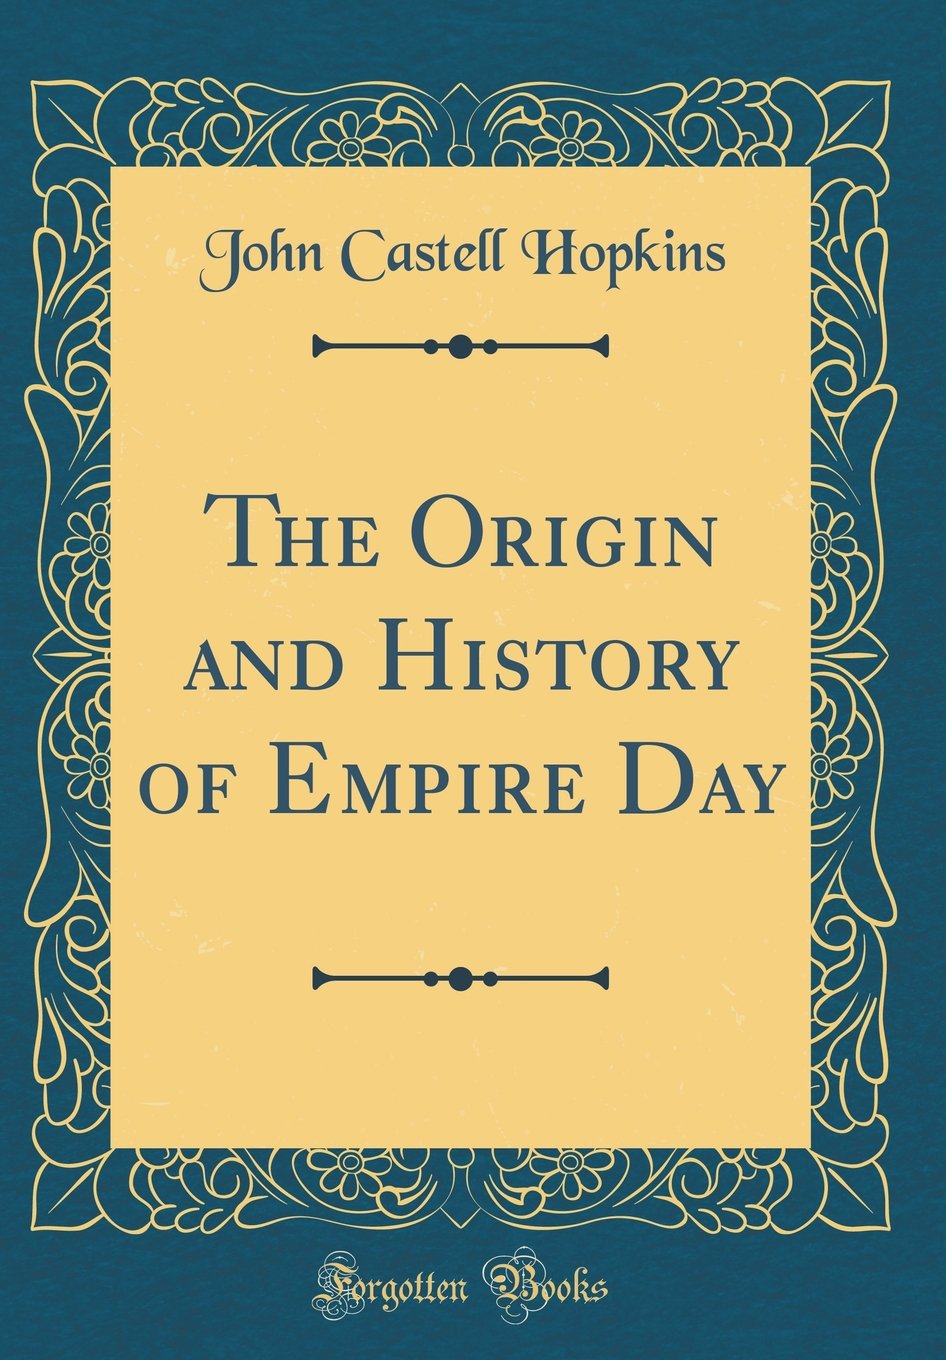 The Origin and History of Empire Day